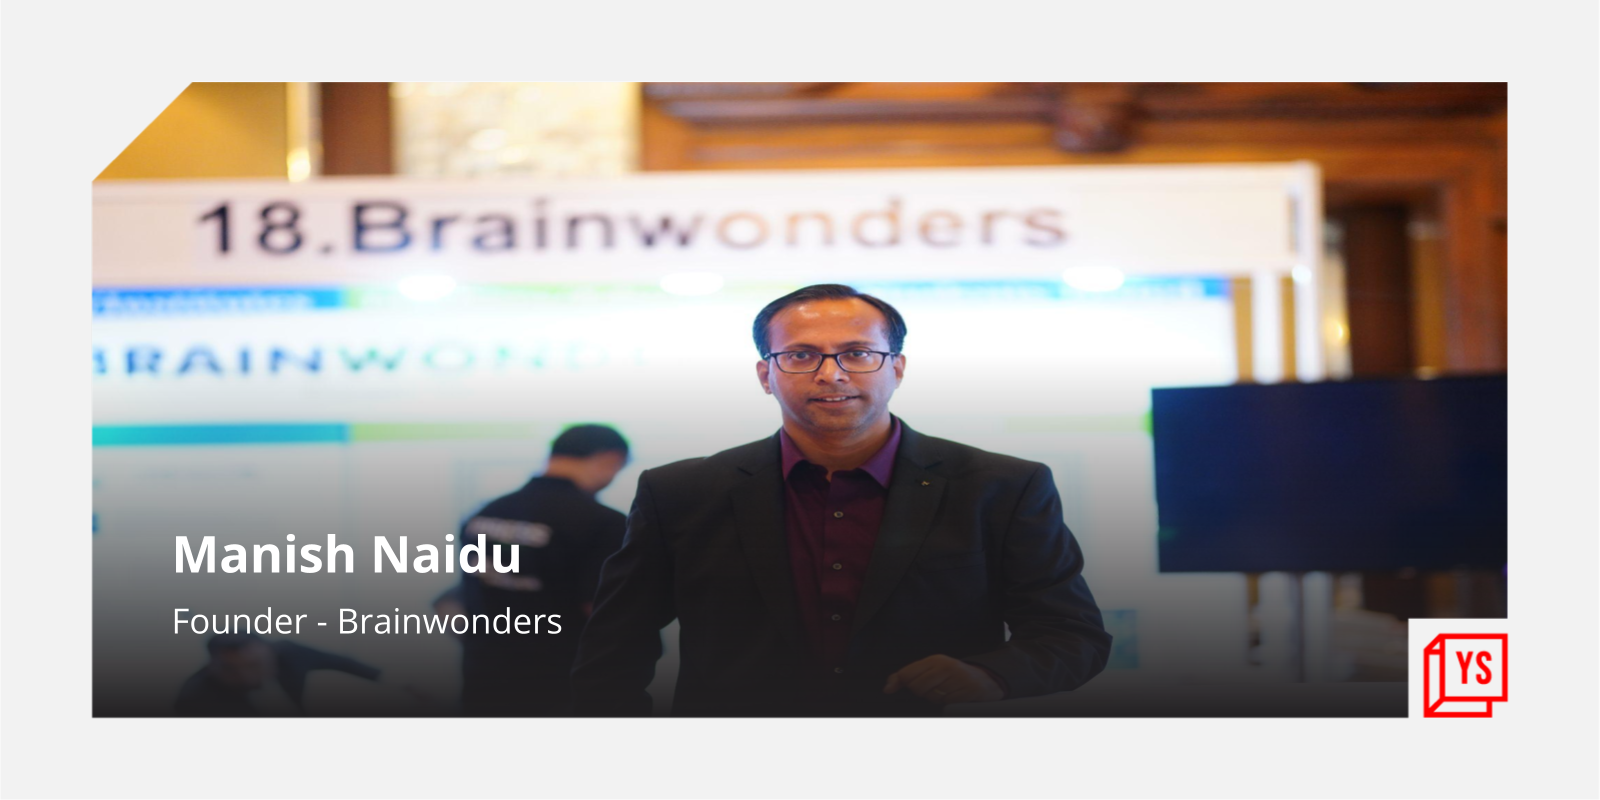 After helping students, here’s why career counselling startup Brainwonders is targeting corporates 

